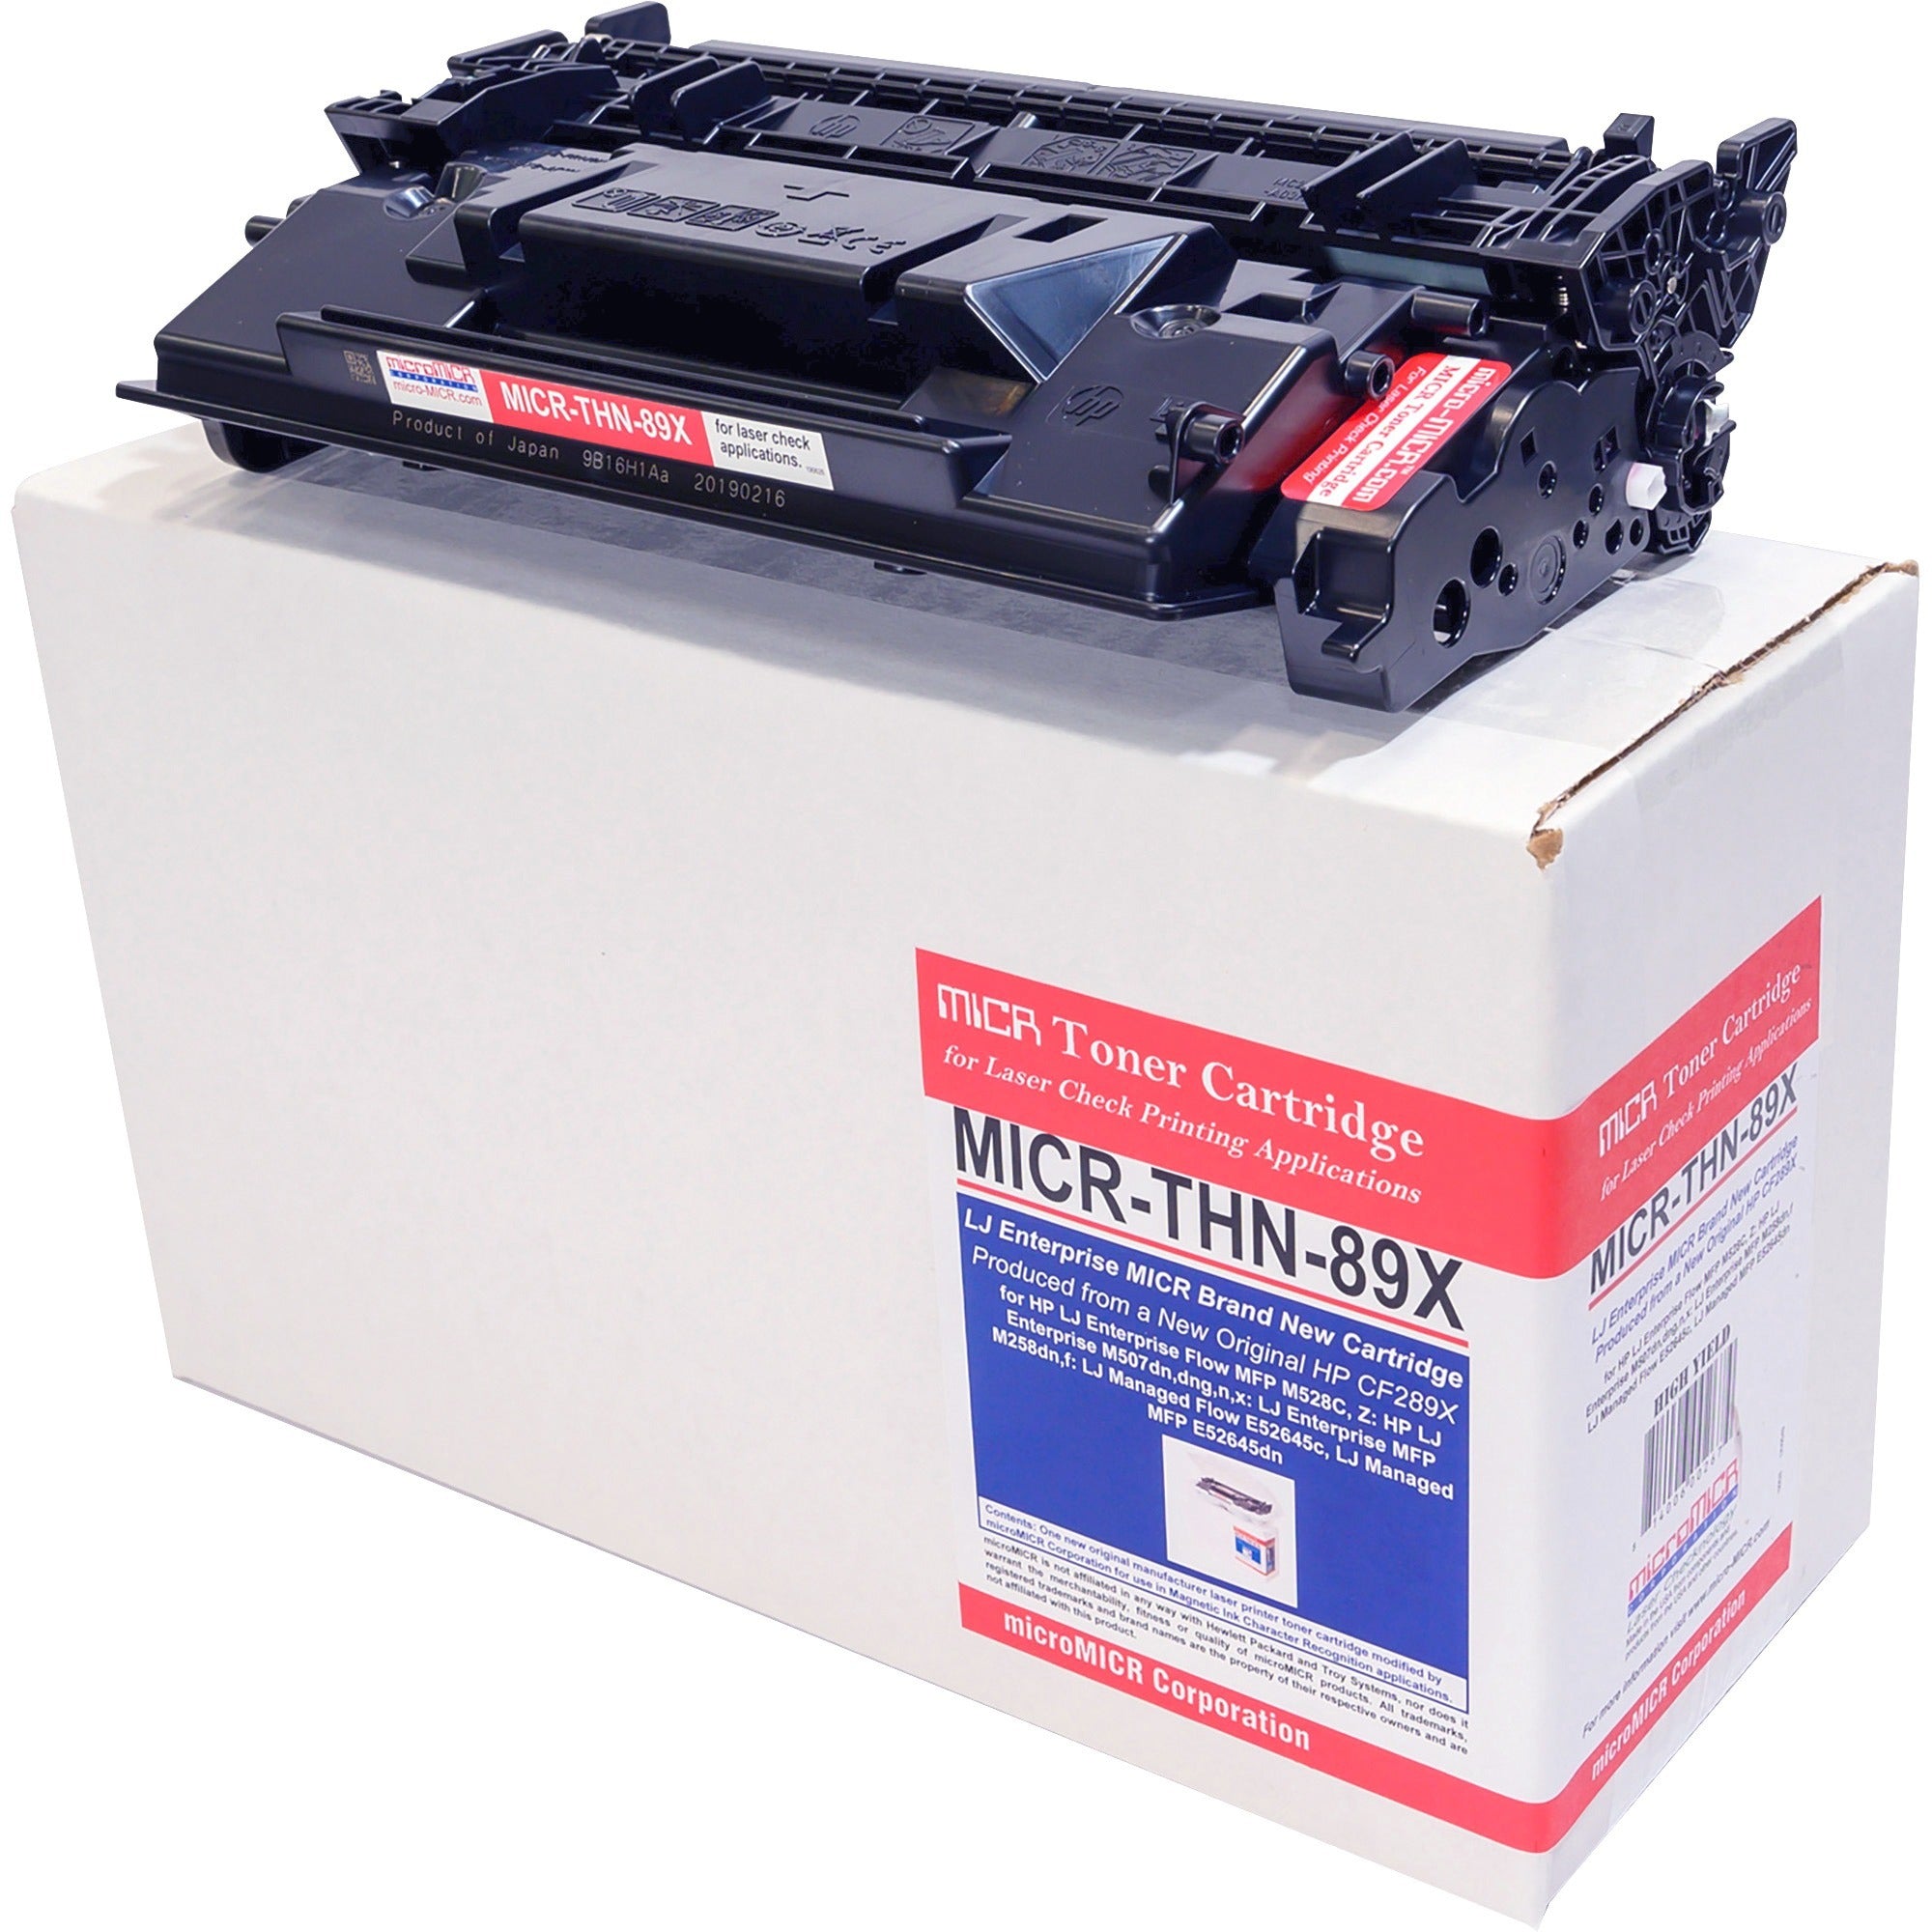 micromicr-micr-toner-cartridge-alternative-for-hp-89x-10000-pages_mcmmicrthn89x - 1